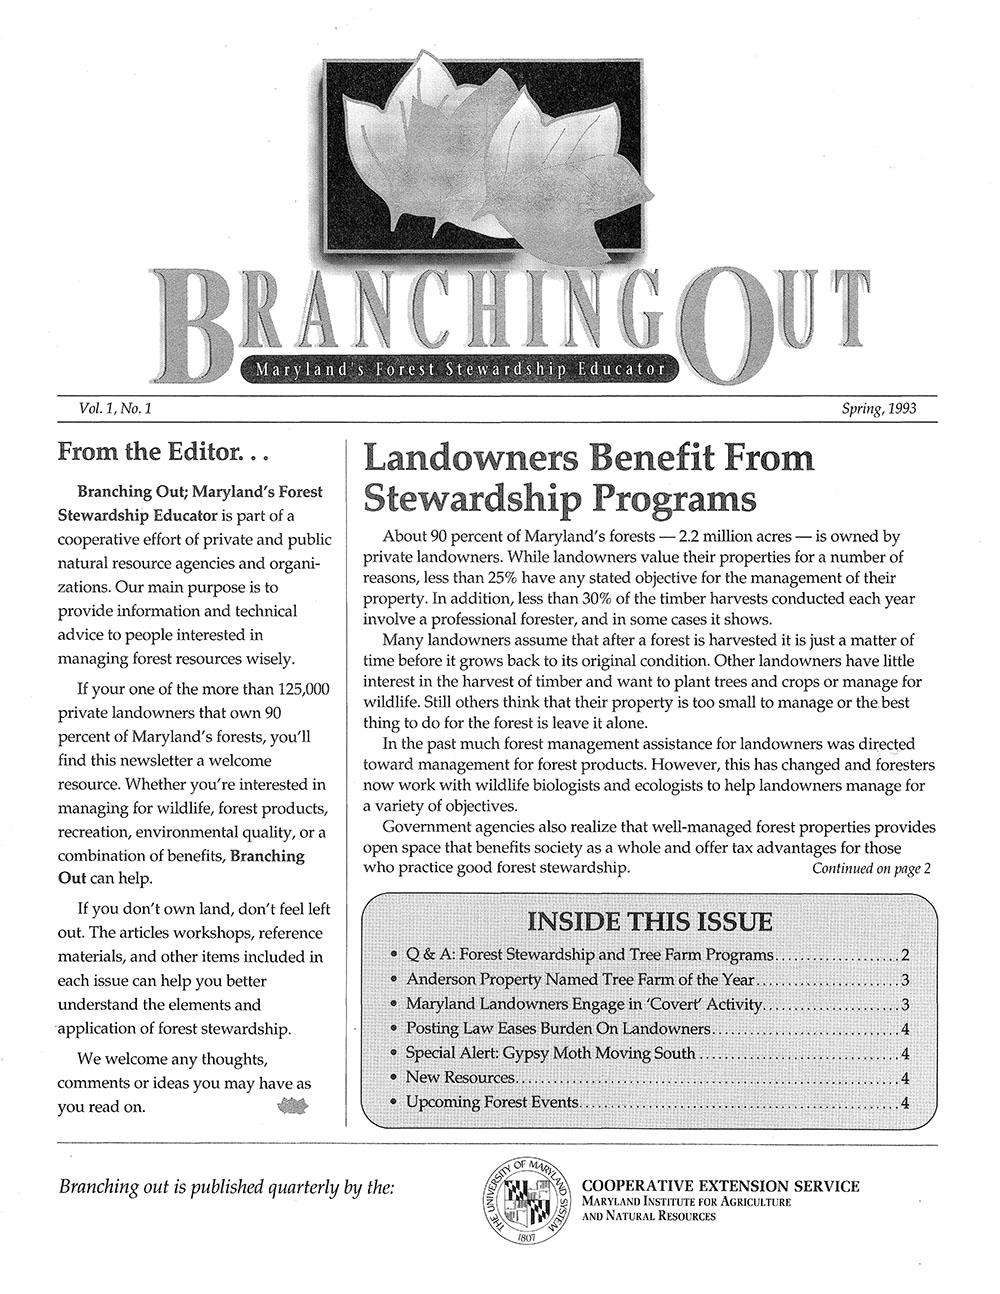 Cover image of the first Branching Out from Spring 1993